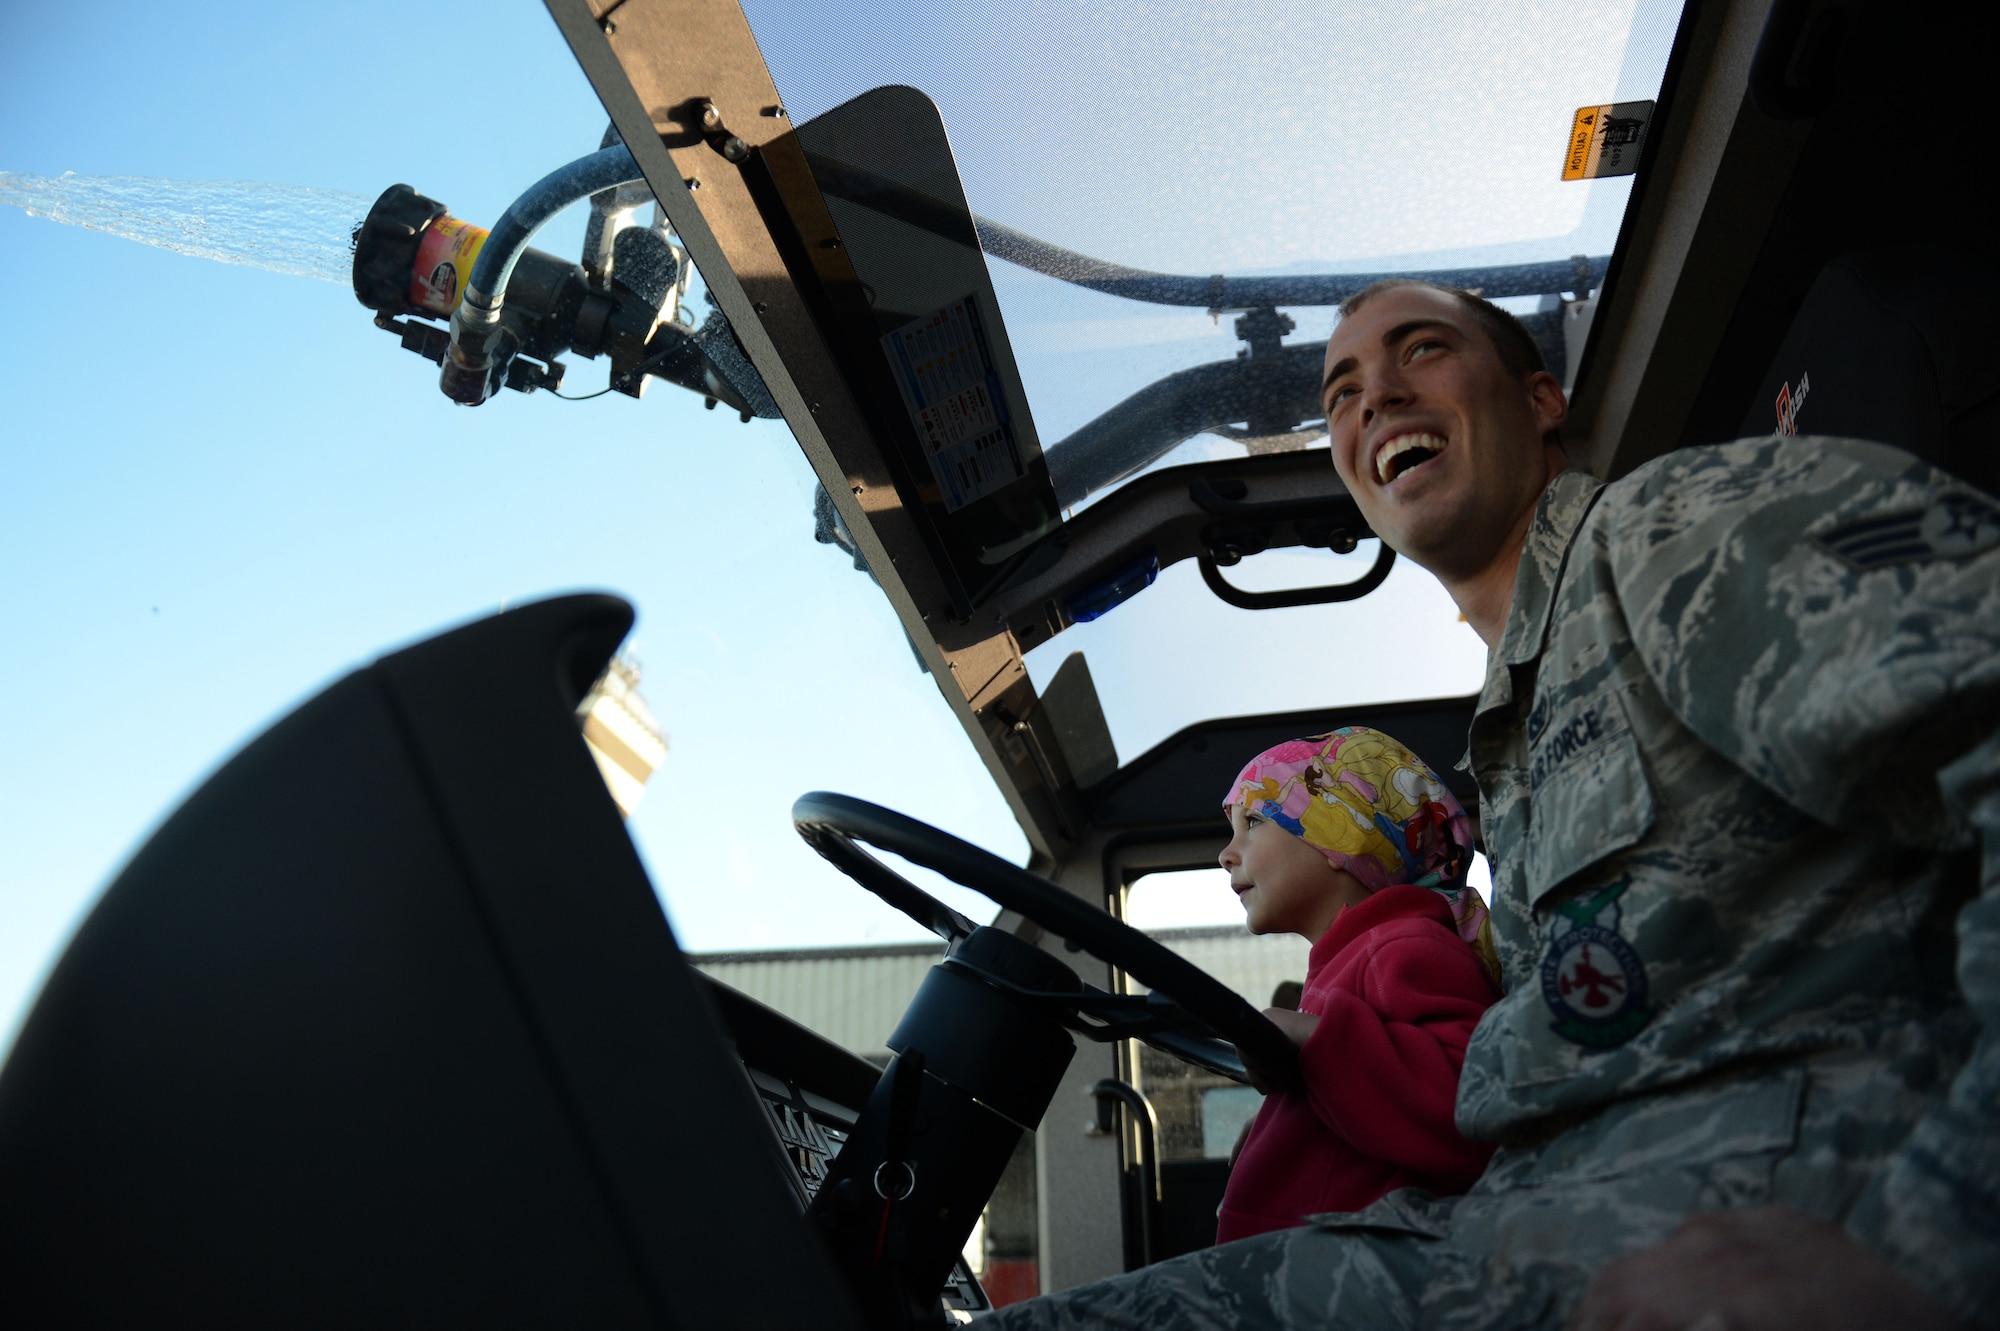 SPANGDAHLEM AIR BASE, Germany – U.S. Air Force Senior Airman Steven Douglass, 52nd Civil Engineer Squadron fire protection technician from Valley City, Ohio, shows Sarah Pittman, 4, how to operate the water cannon aboard a fire truck Aug. 16, 2013. Sarah was diagnosed with leukemia in December 2010. Although she no longer needs IV chemotherapy, she regularly receives checkups and medication at the Mutterhaus der Borrormaerinnen in Trier. (U.S. Air Force photo by Airman 1st Class Gustavo Castillo/Released)